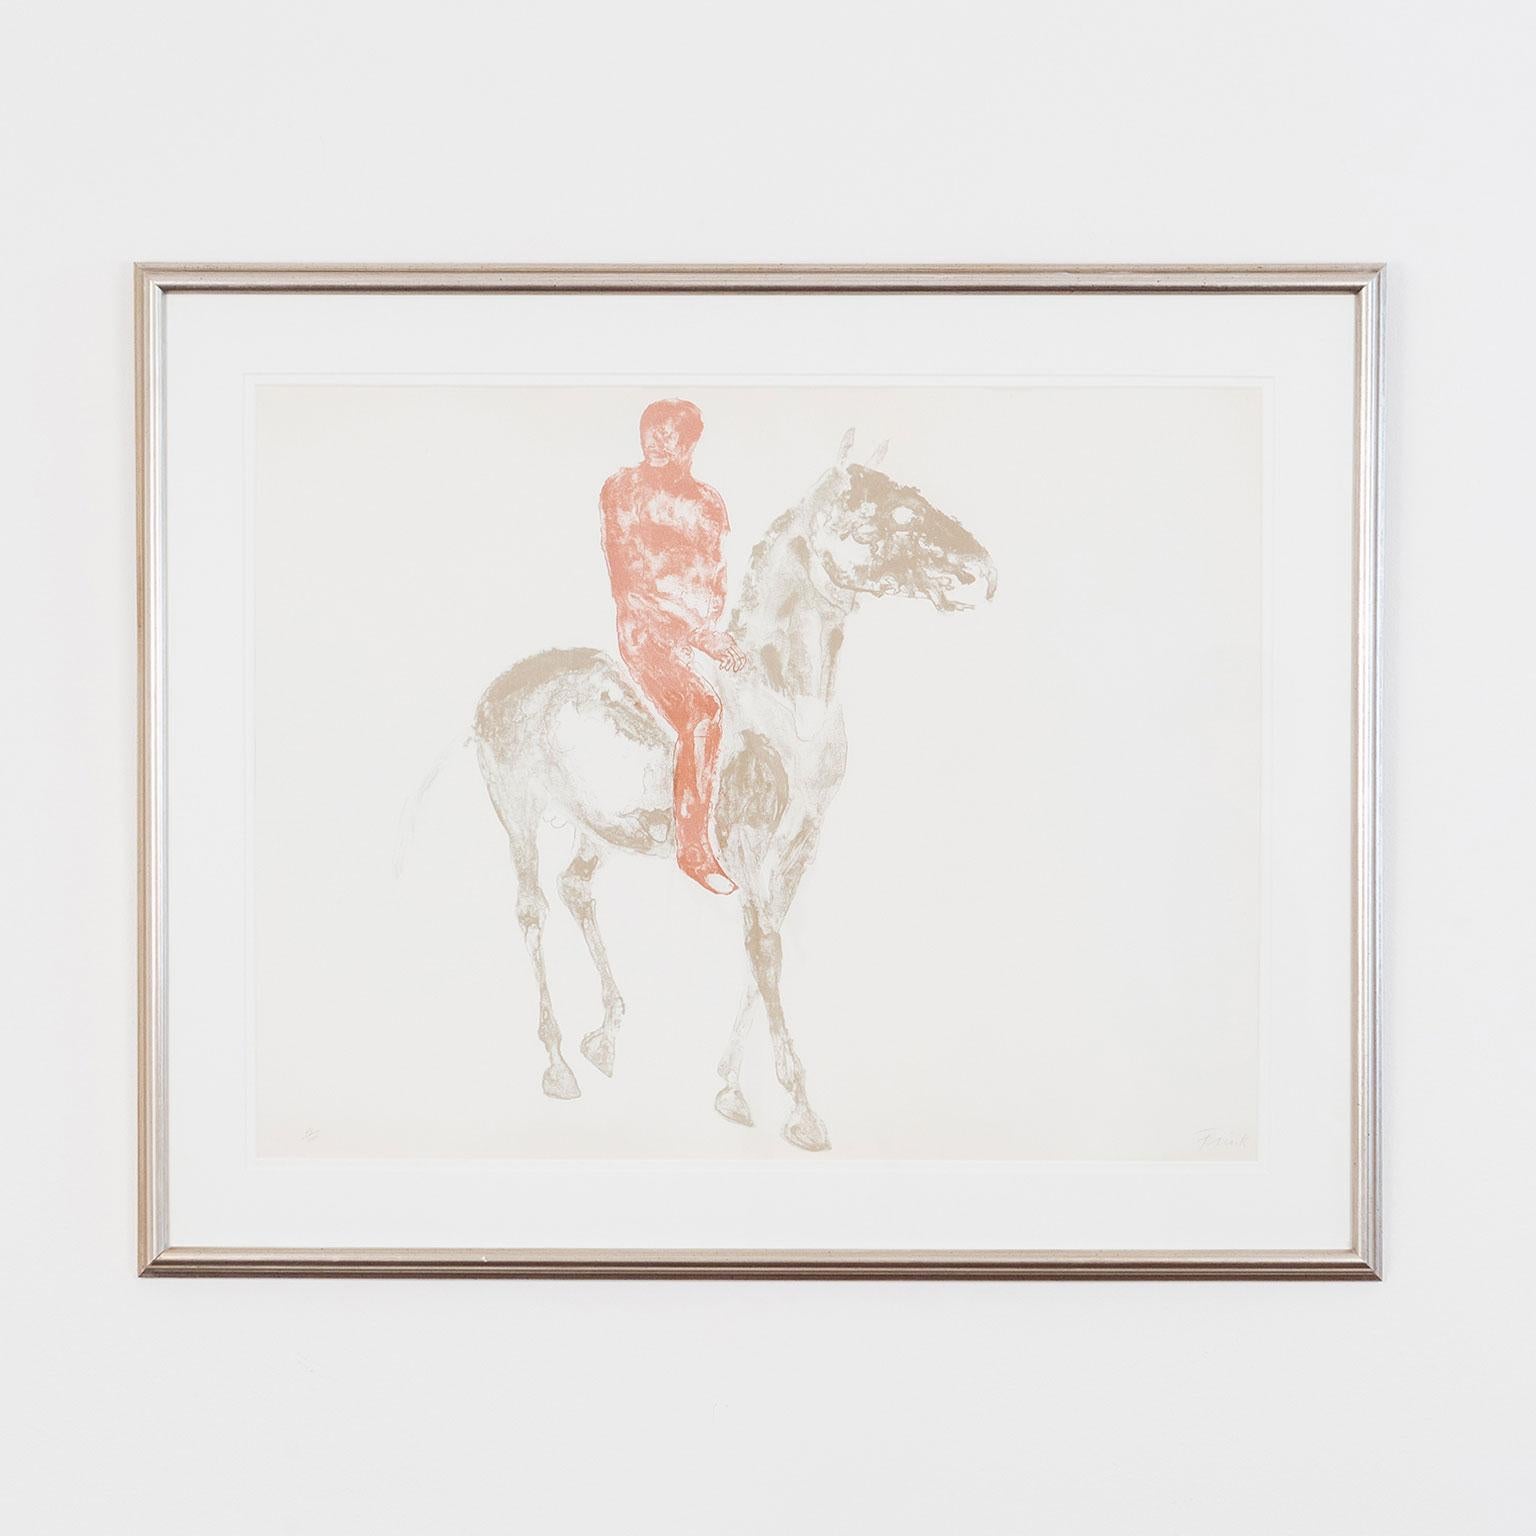 "Horse and Rider III"   1970  Lithograph  Signed and numbered by artist - Print by Elisabeth Frink